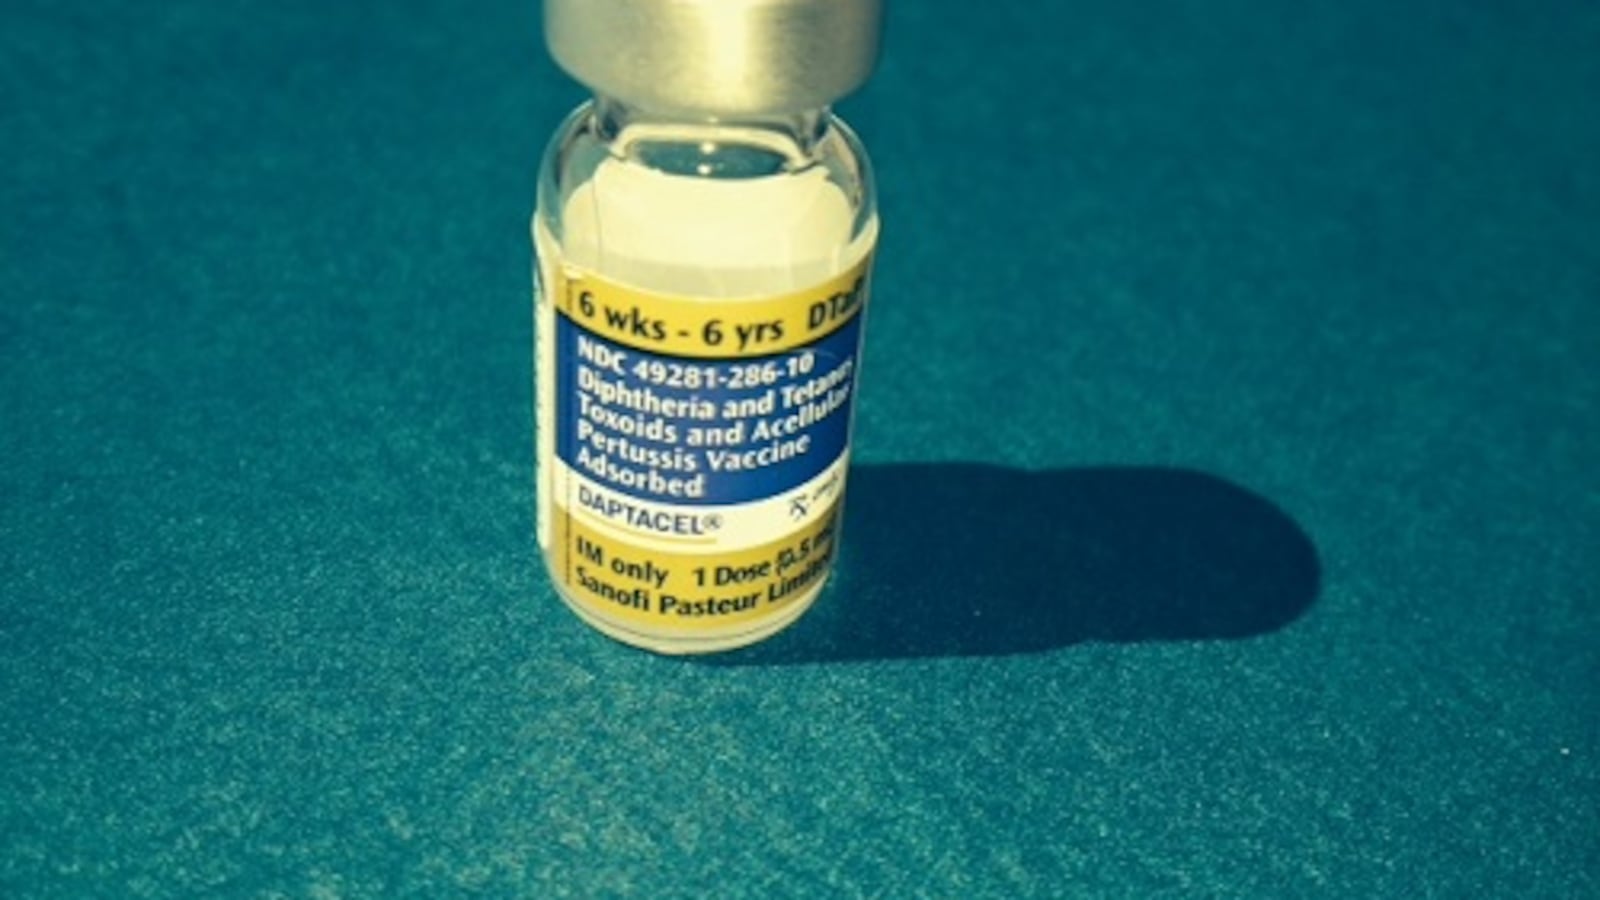 This vial contains the DTaP vaccine, which prevents whooping cough.